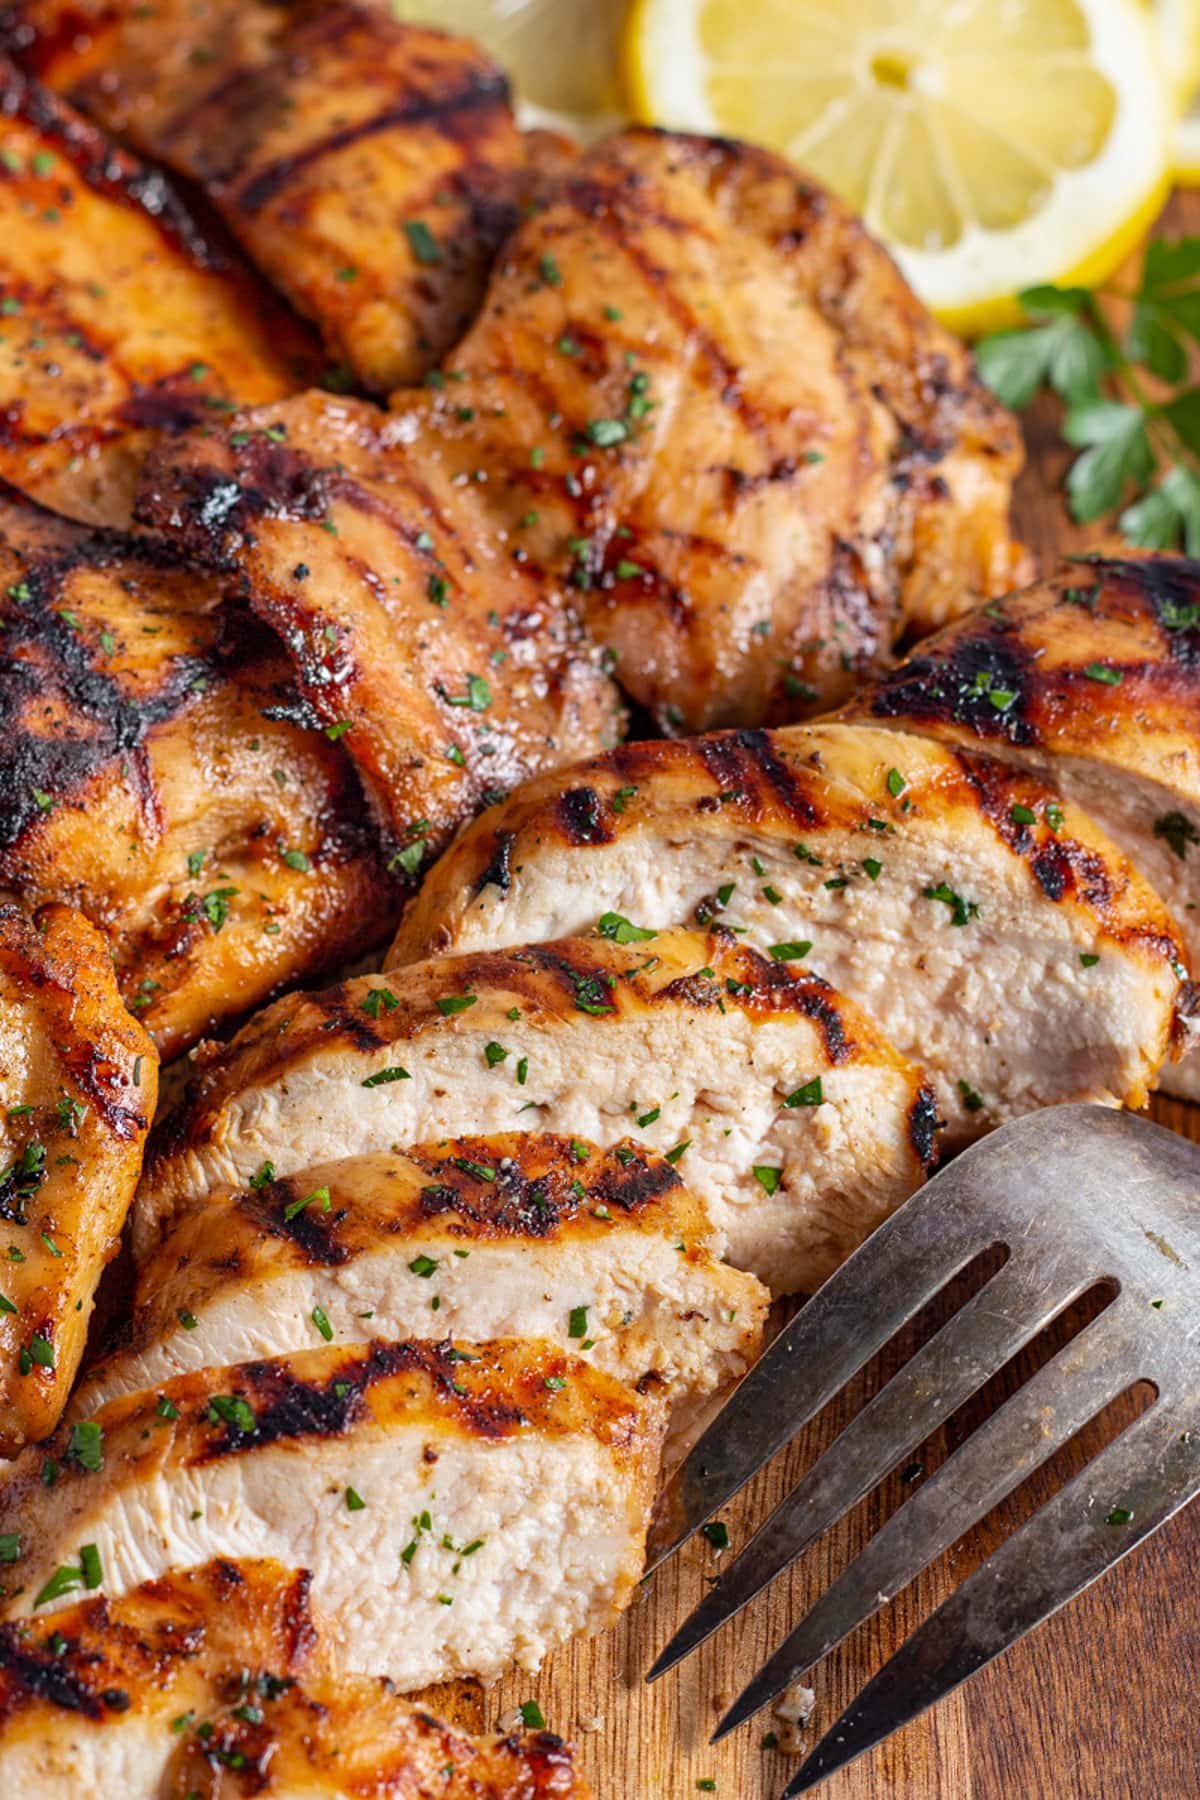 Juicy mesquite grilled chicken, with a chicken breast sliced thick to show the inside meat.